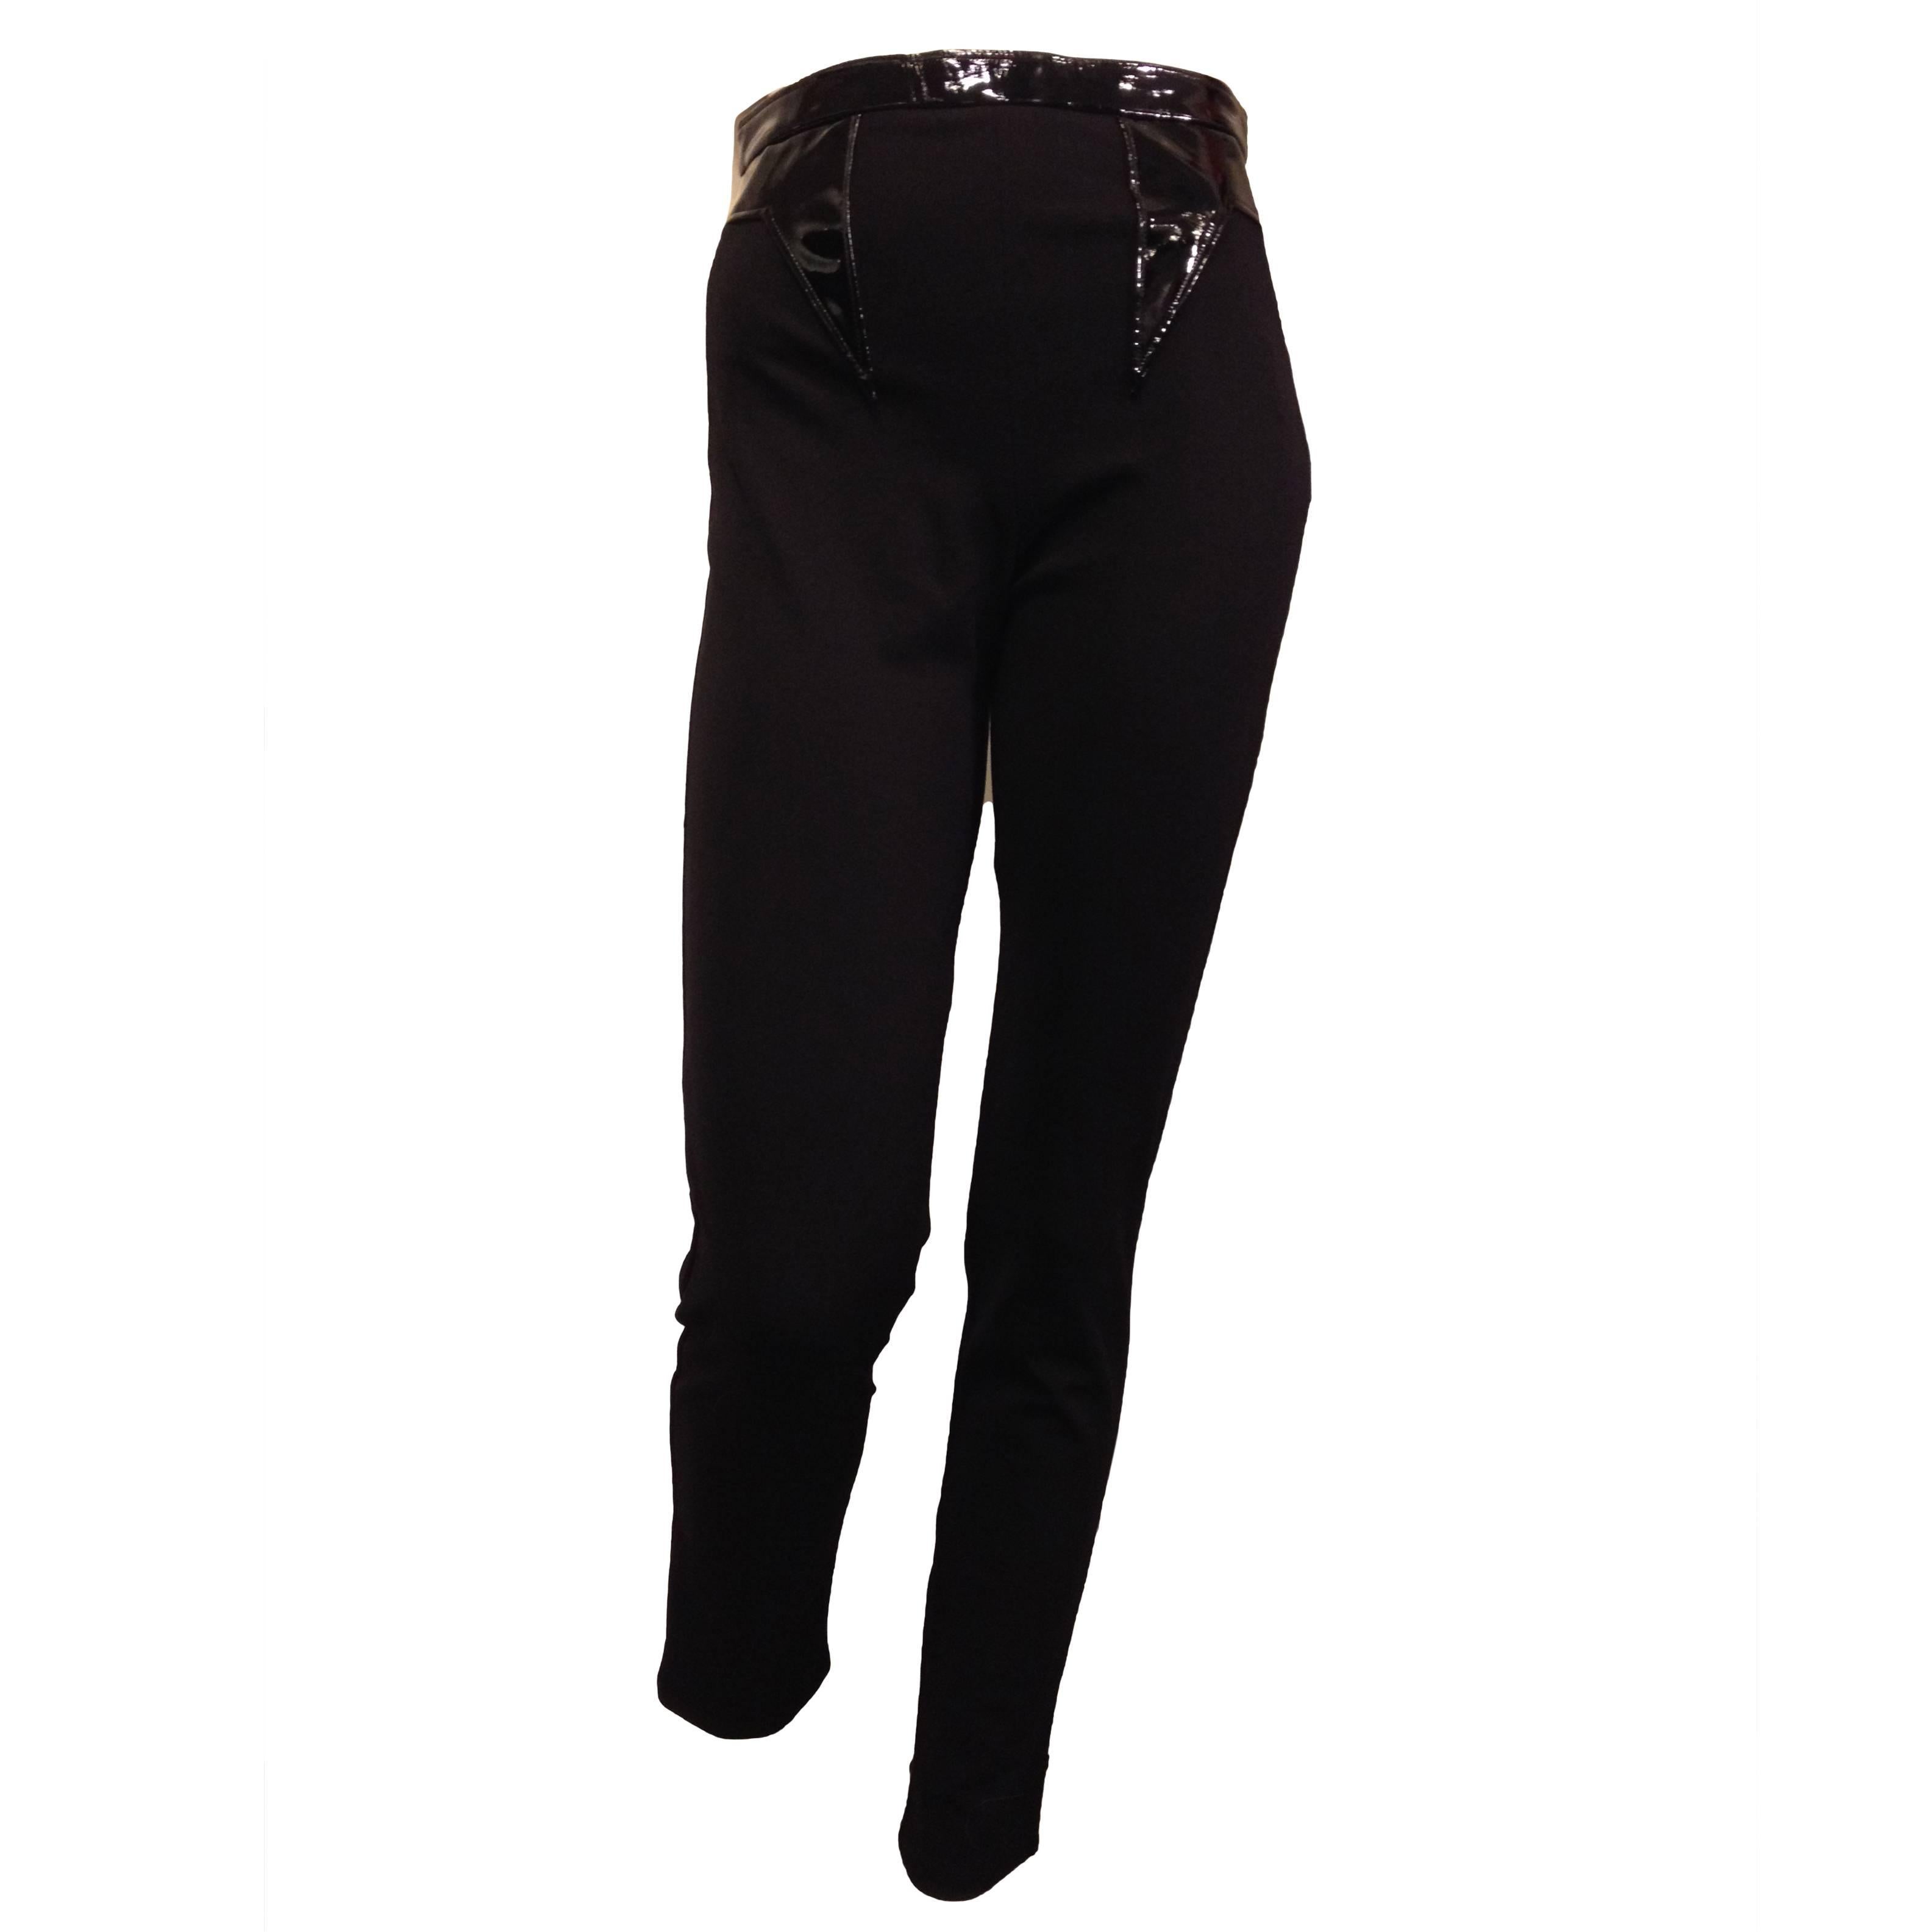 Givenchy Black Stretch Pant with Patent Inset